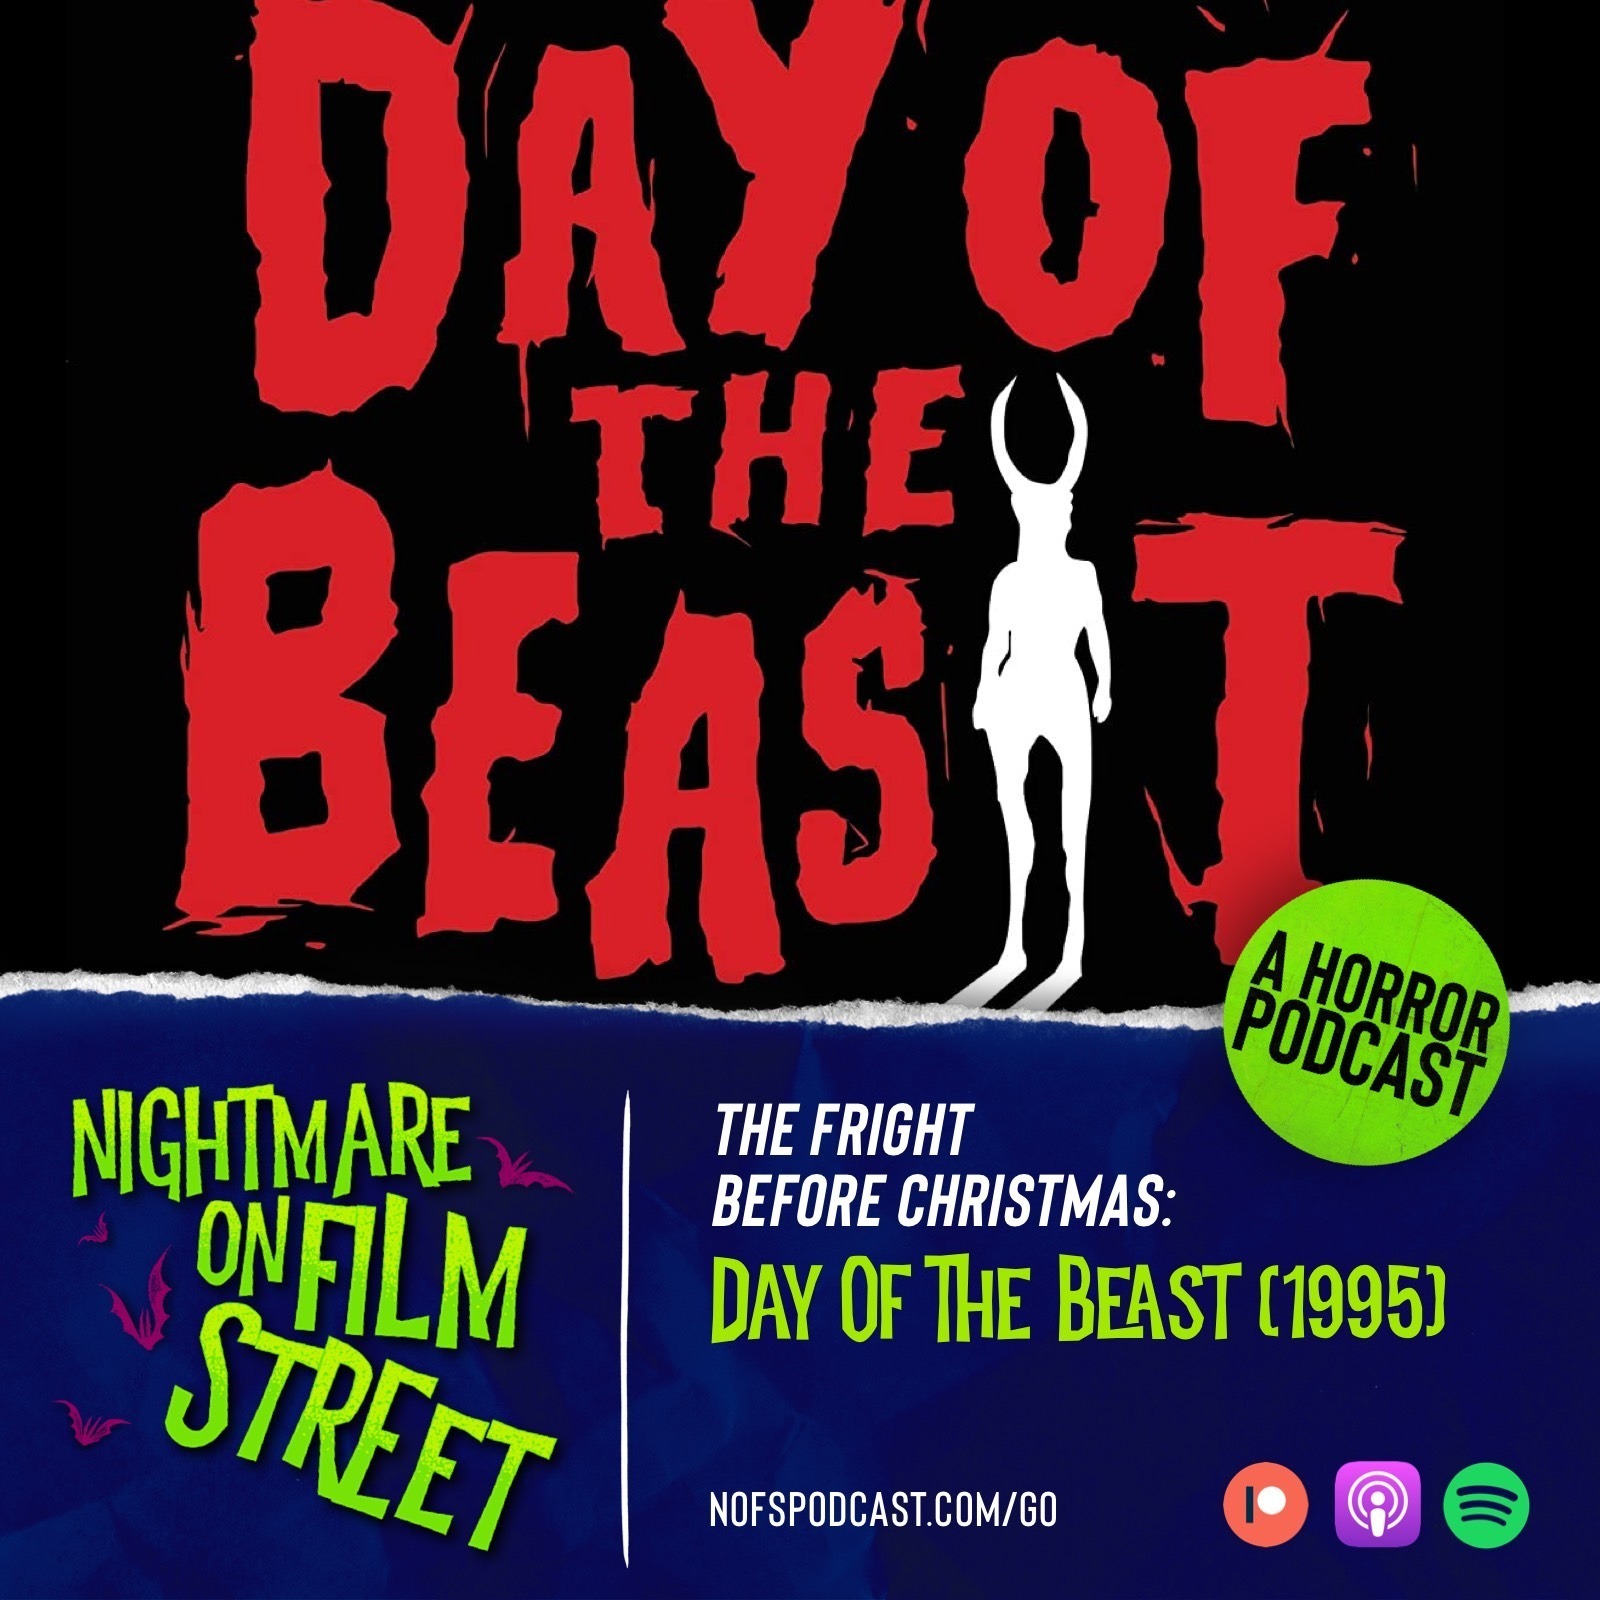 The Fright Before Christmas: The Day of The Beast (1995)